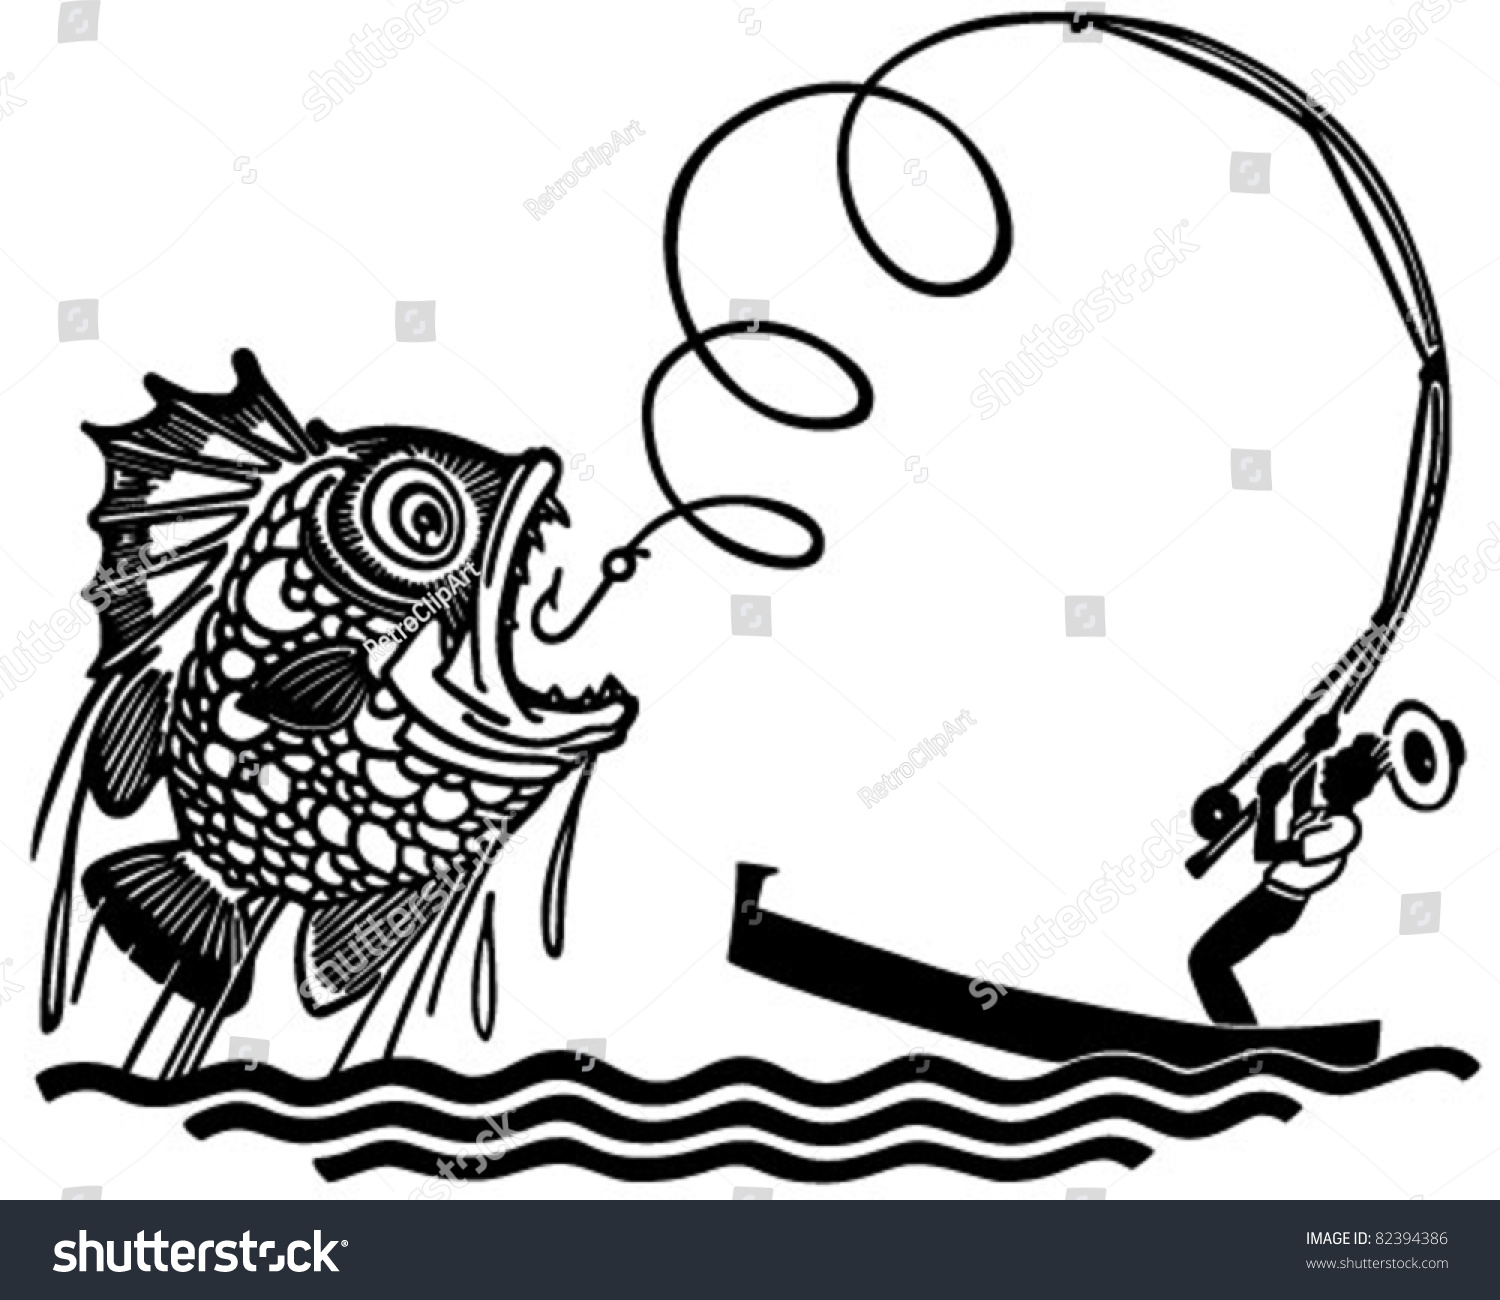 clipart catching a fish - photo #35